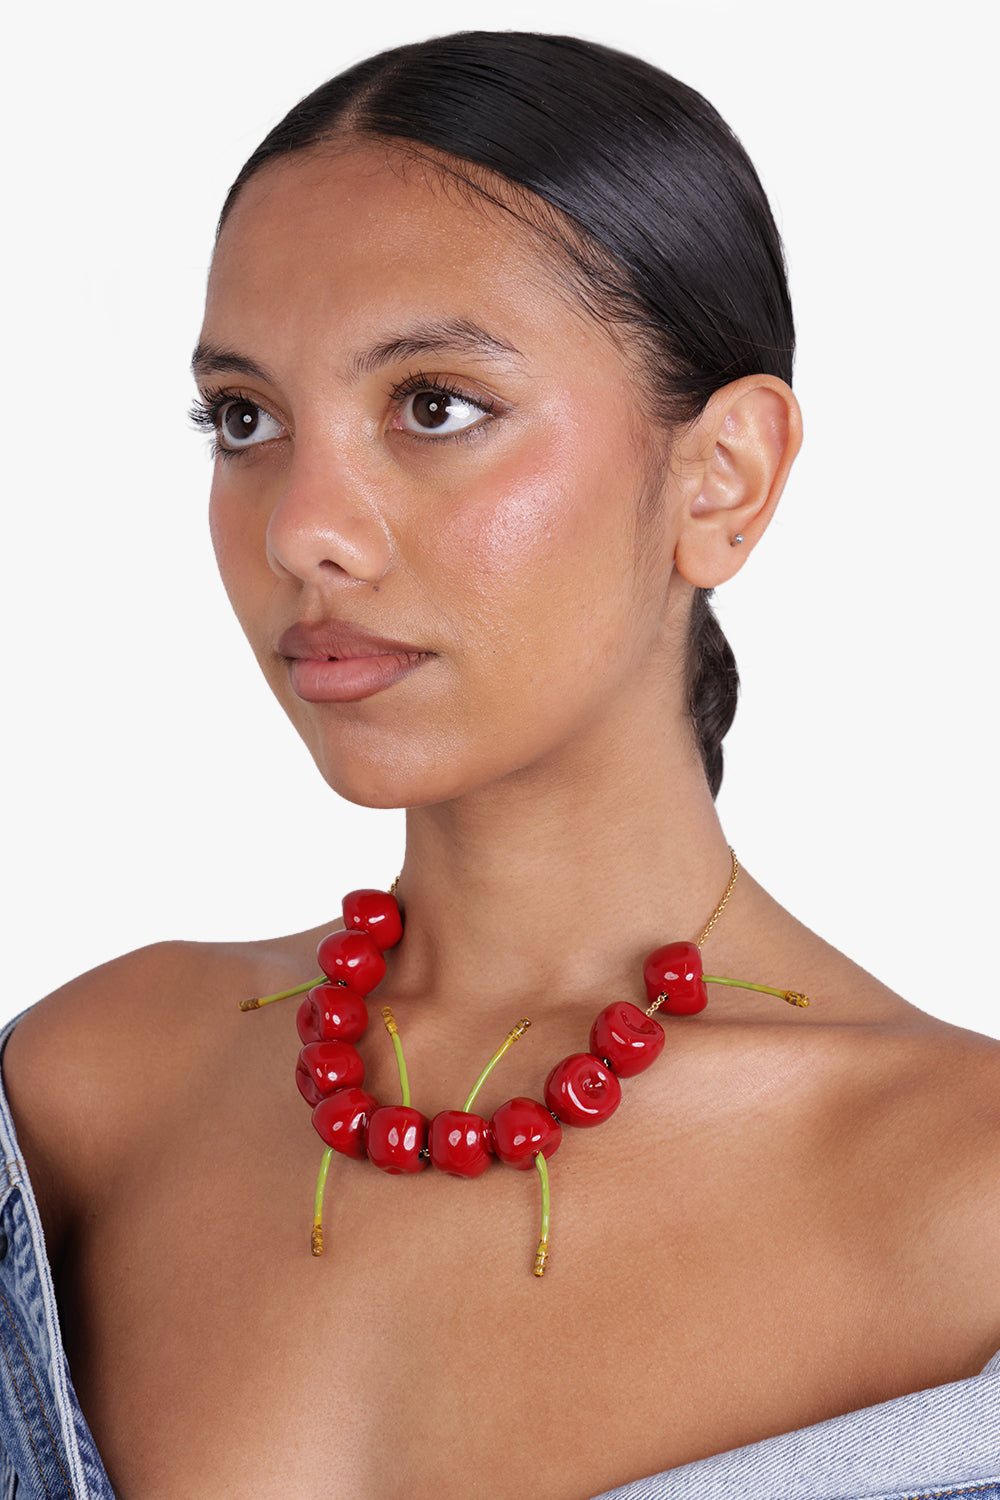 JACQUEMUS JEWELLERY Red Le Collier Cerise Necklace | Cherry